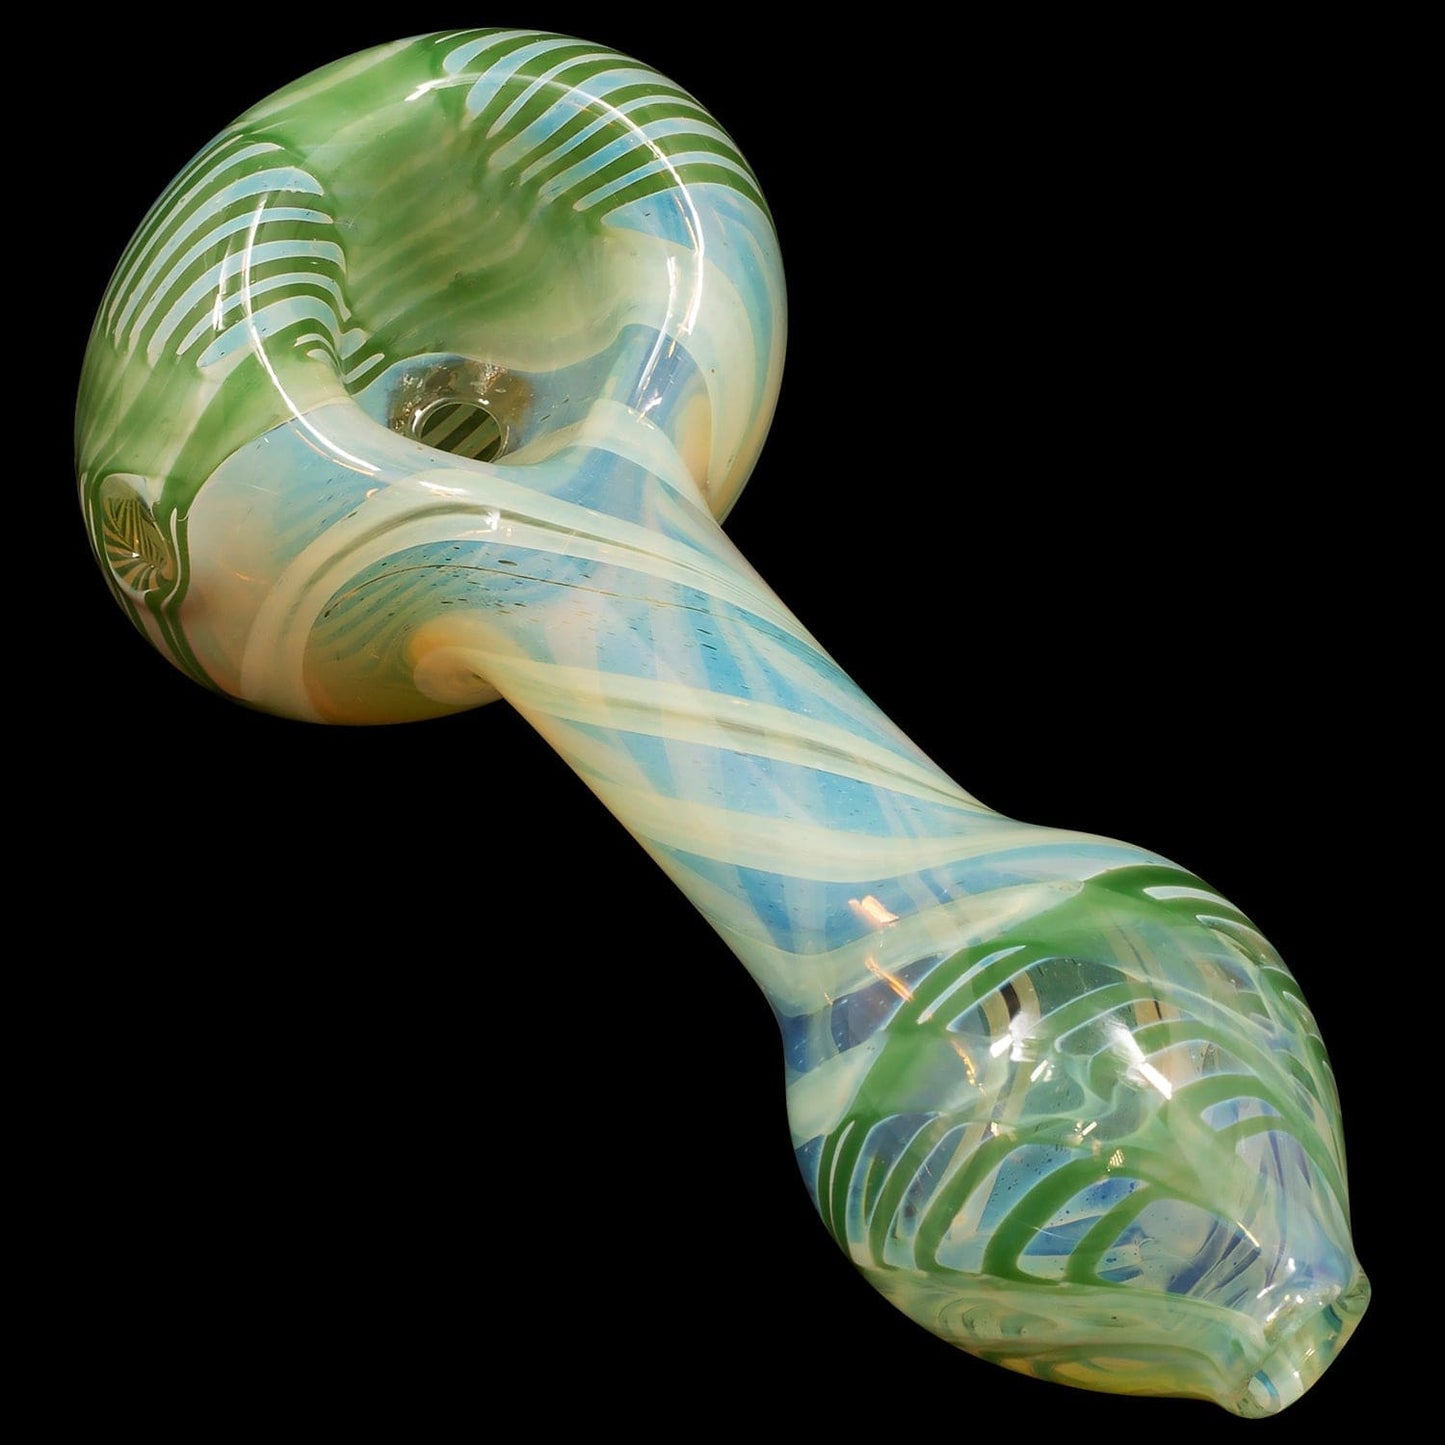 LA Pipes Hand Pipe Green / 4.5 Inch "Twisty Cane" Spoon Glass Pipe (Various Colors)